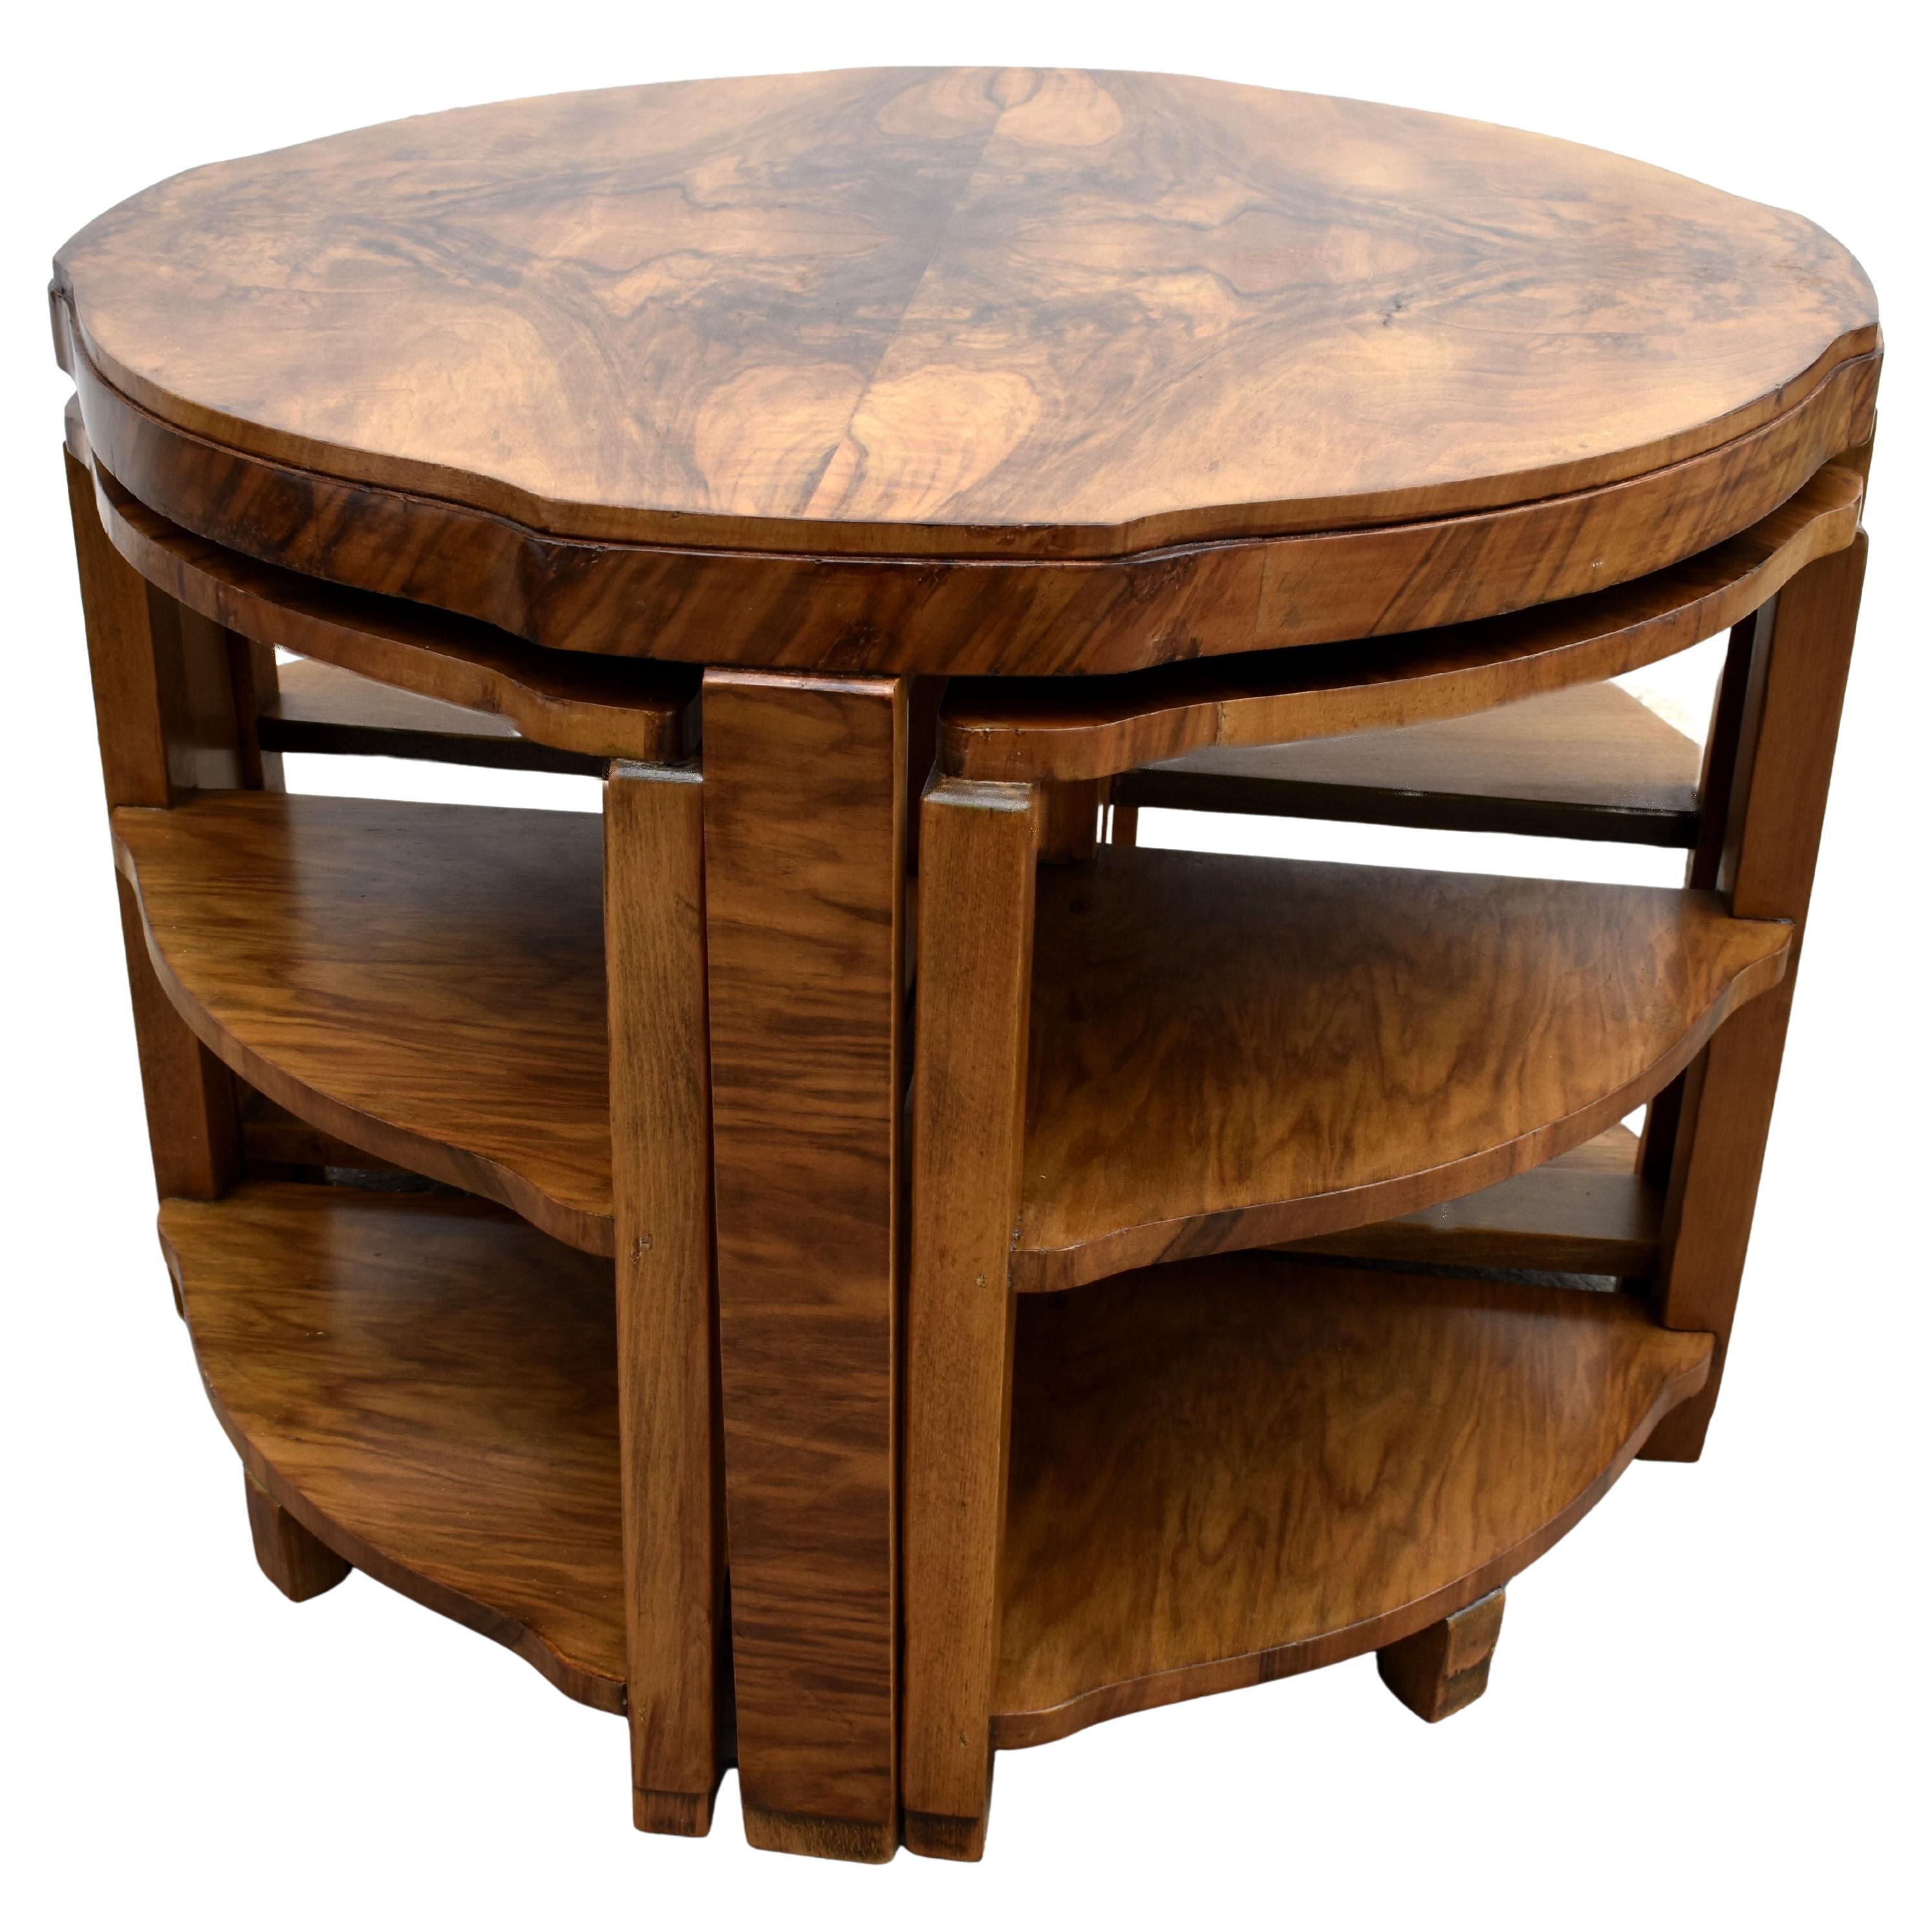 Art Deco High Quality Figured Walnut Quintetto Nest of 5 Tables, English, 1930 For Sale 6